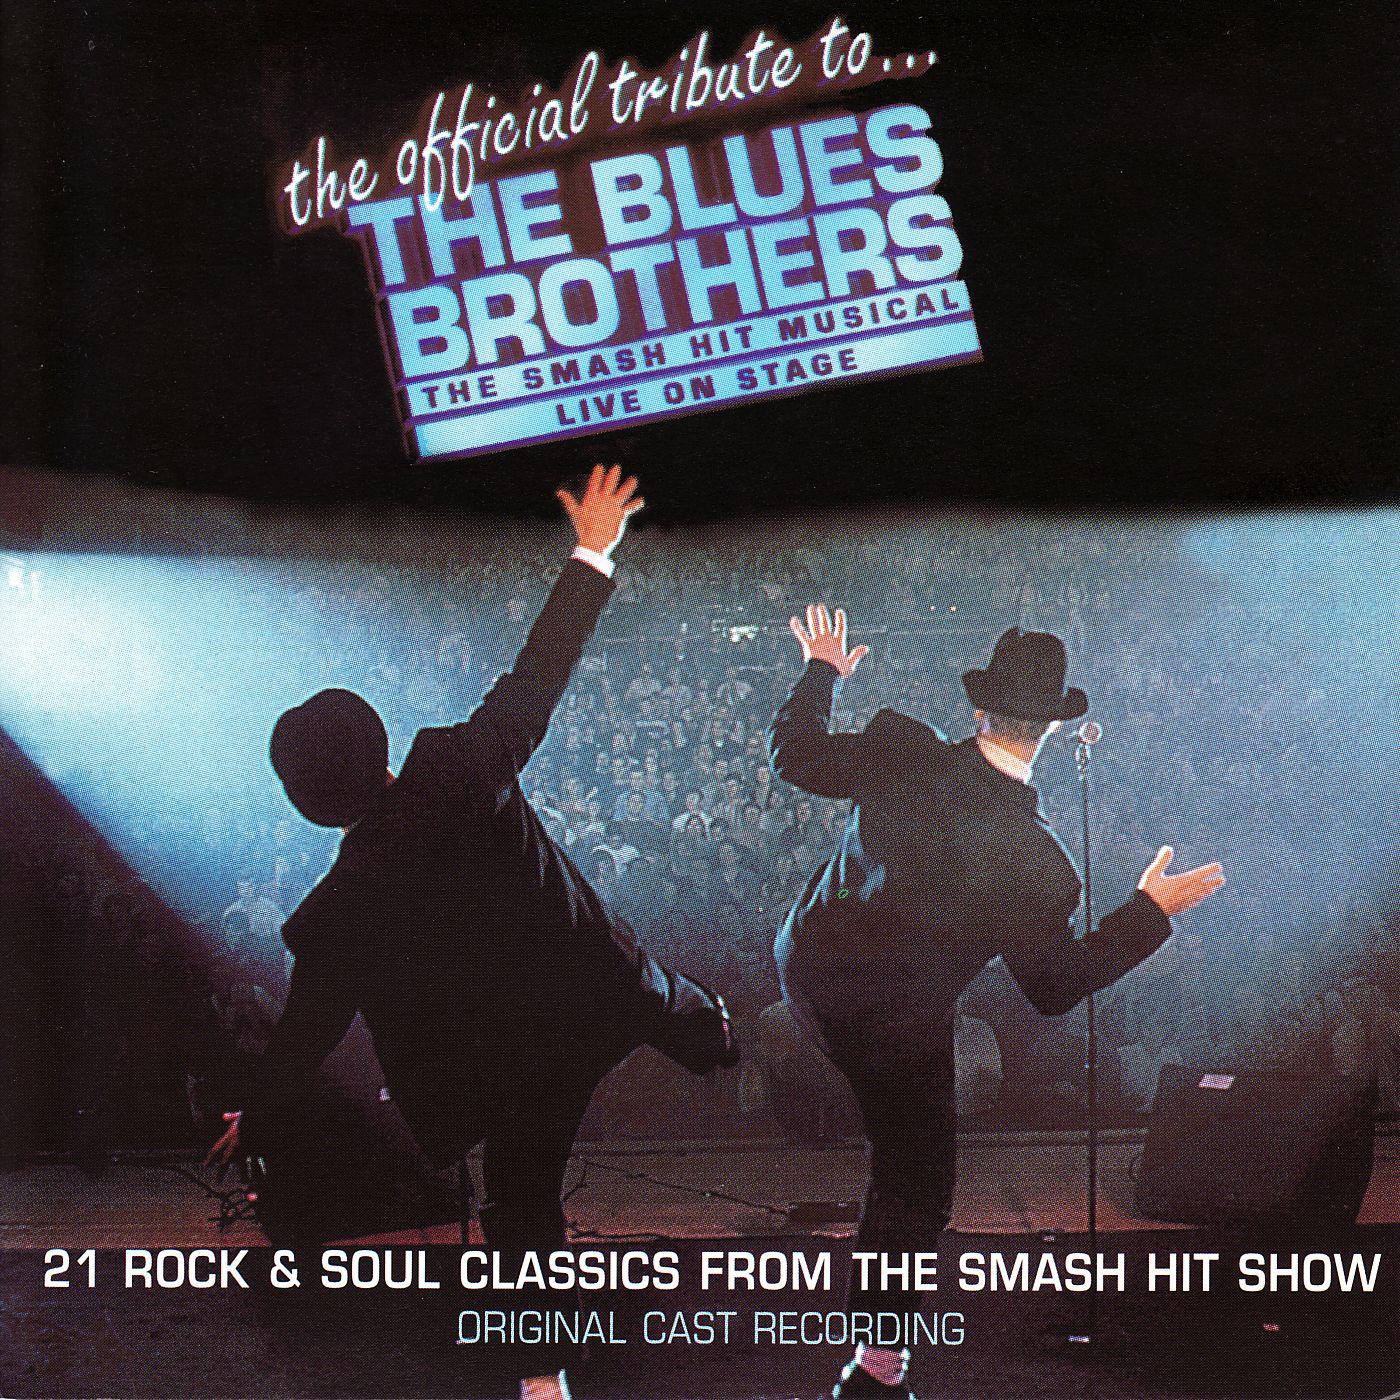 The Blues Brothers (The Official Tribute to the Blues Brothers - Original Cast Recording)